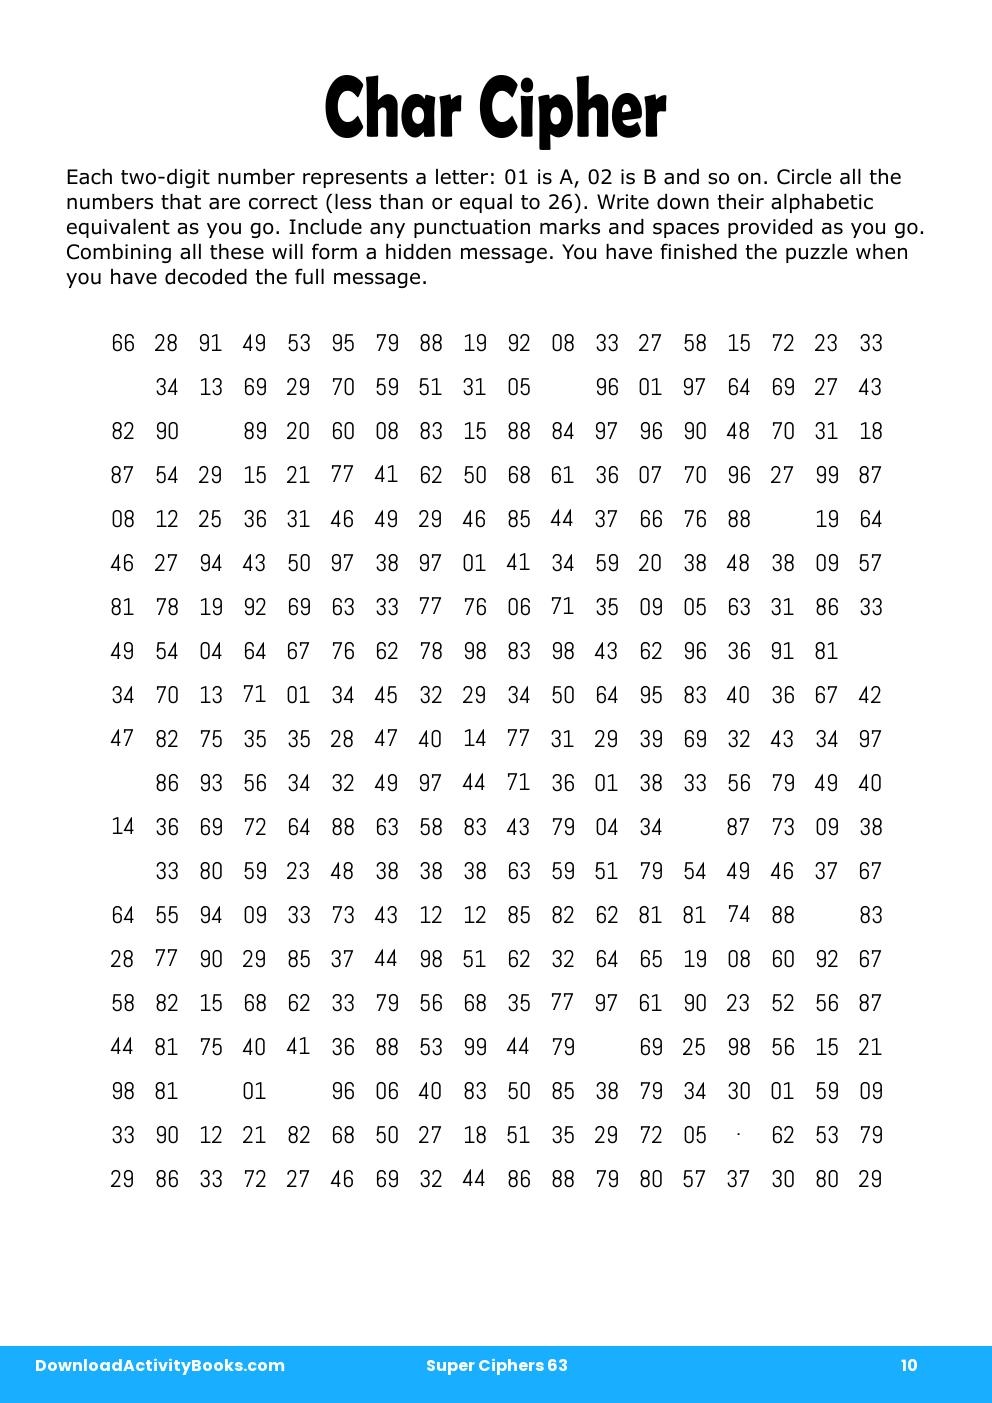 Char Cipher in Super Ciphers 63